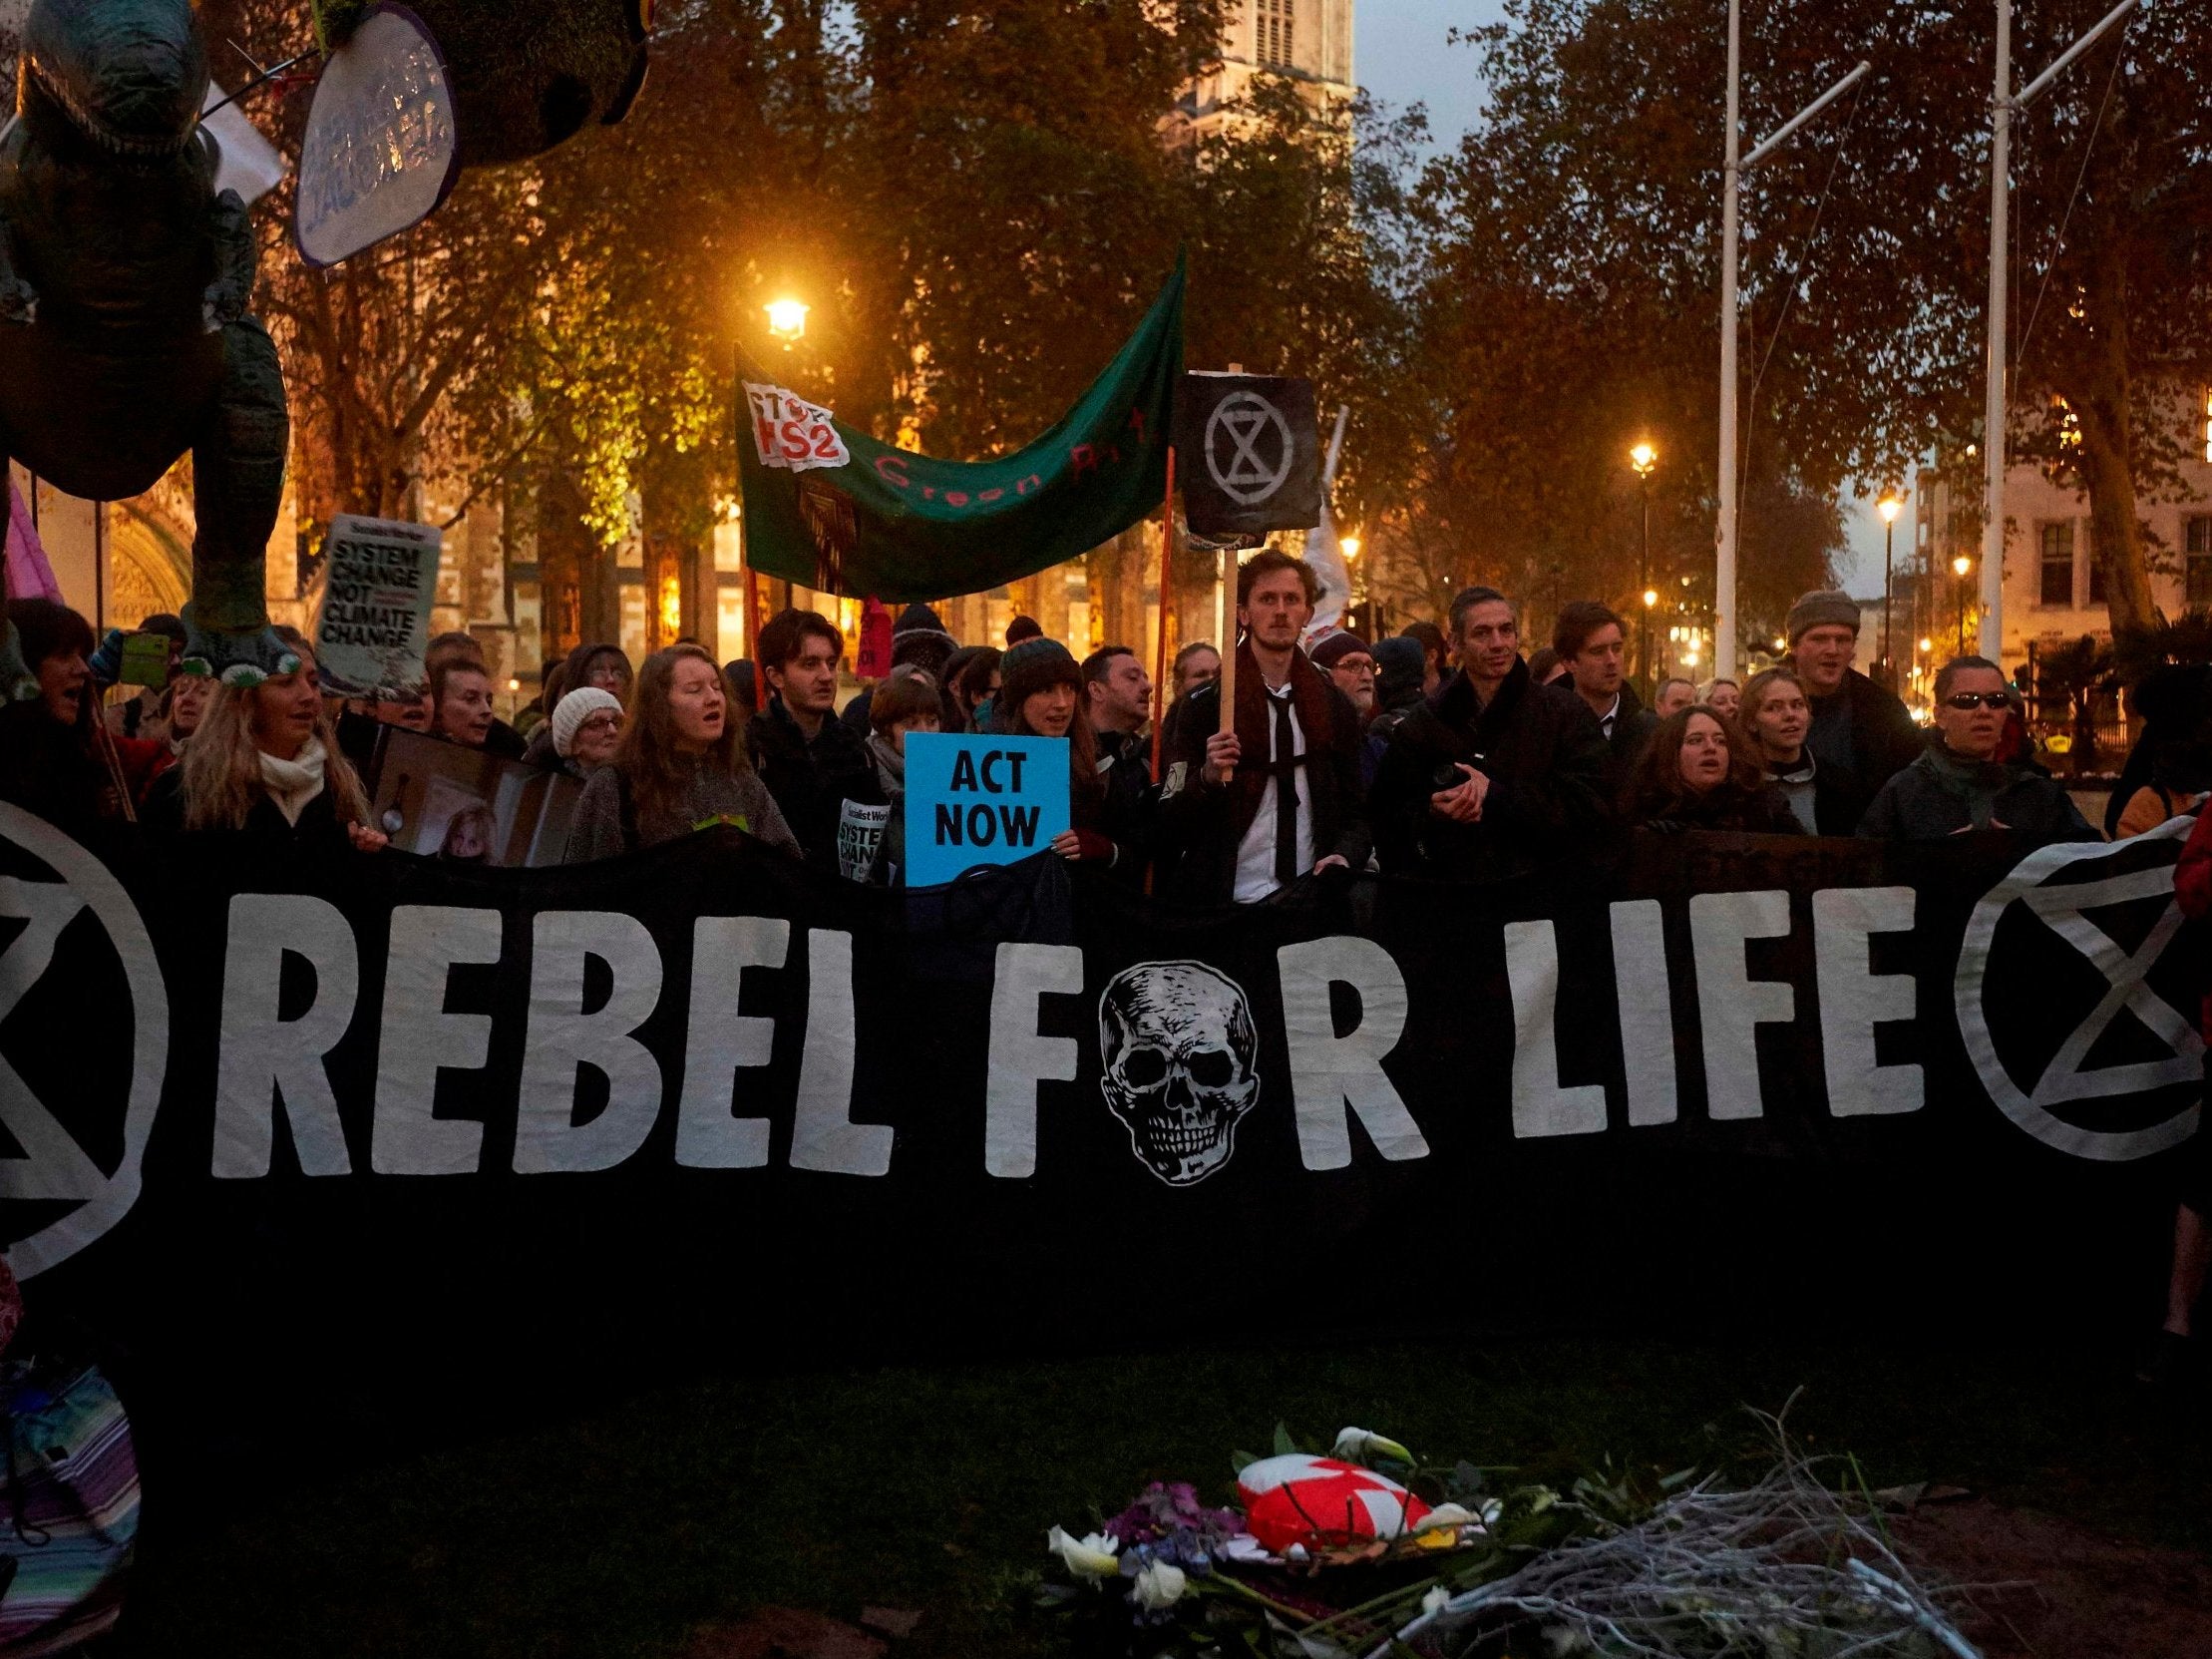 Environmental activists from the Extinction Rebellion movement gather in Parliament Square in central London on 24 November, 2018